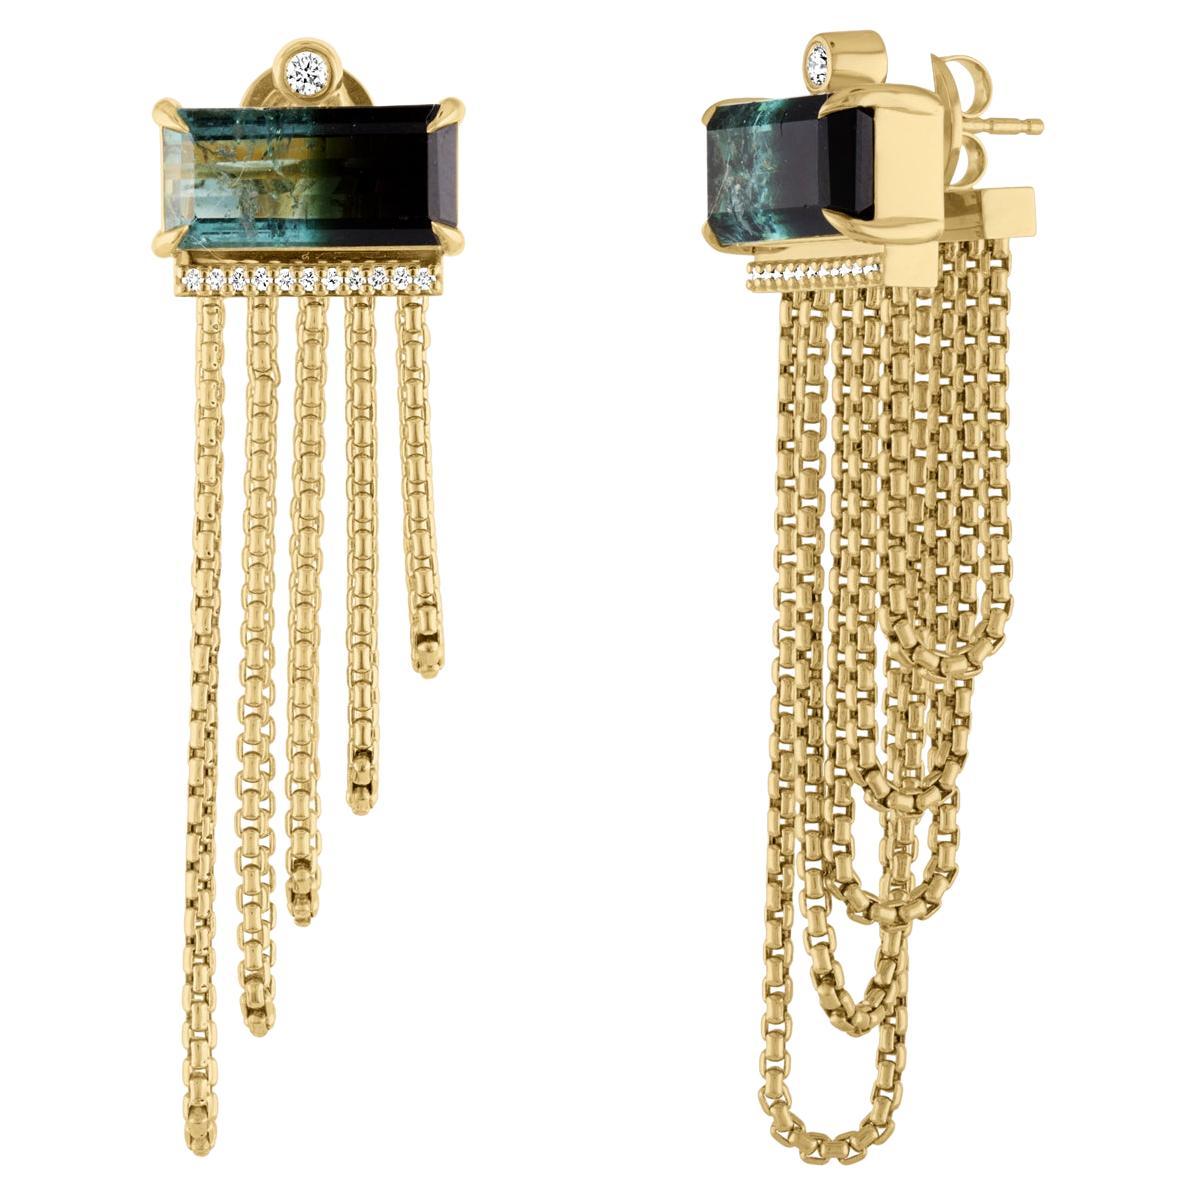 Aqua to deepest, darkest green-almost black banded tourmalines are set with edgy claw prongs, sitting atop looped lengths of round box chain, all in 18K yellow gold. This front to back design distributes the weight of the earring evenly and